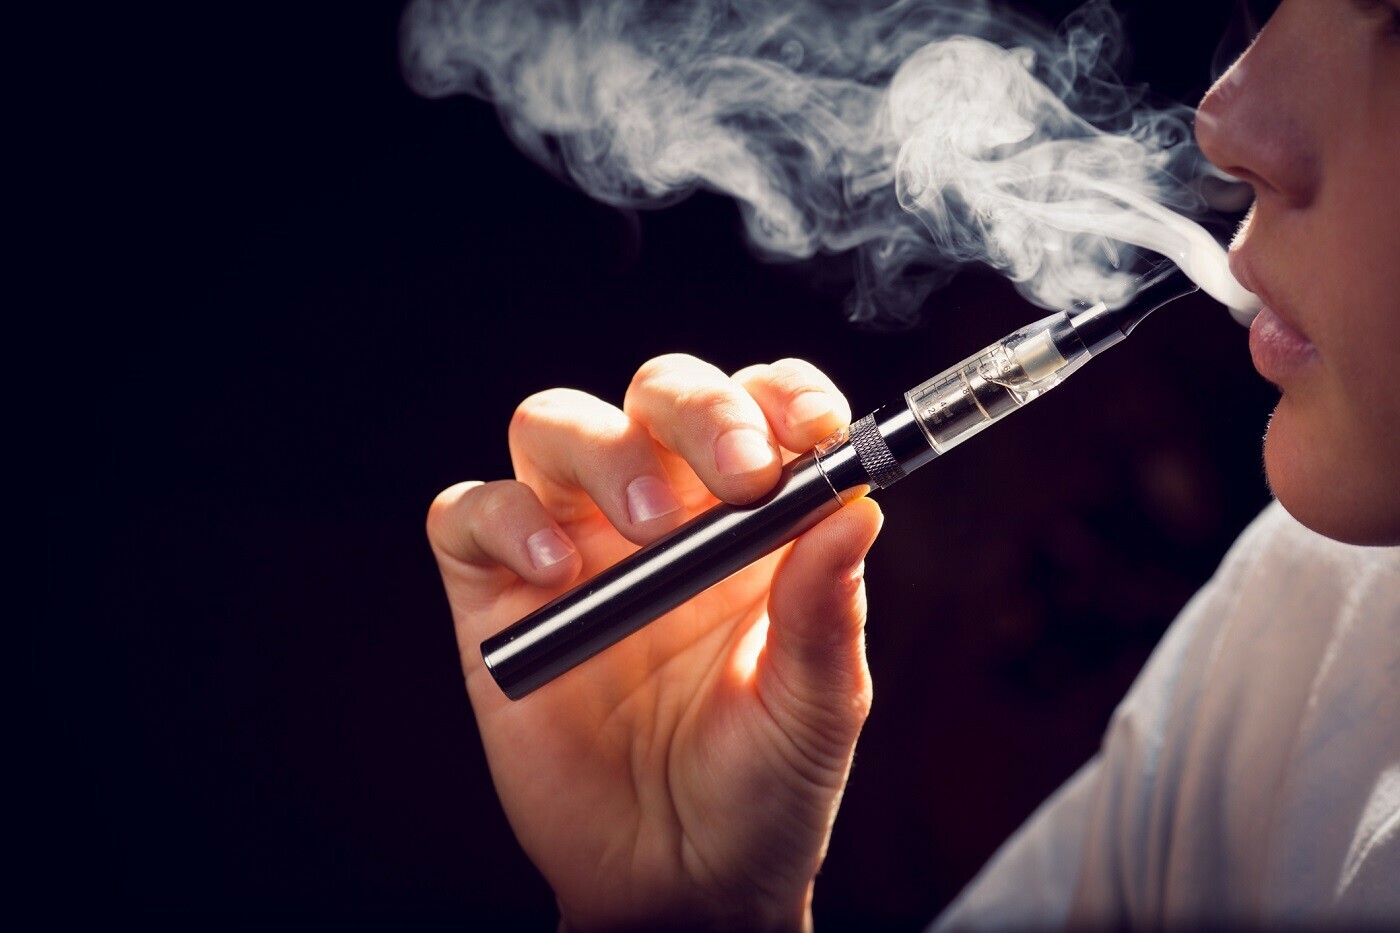 Australia Takes a Stand: Ban on Recreational Vaping and E-Cigarette Regulations